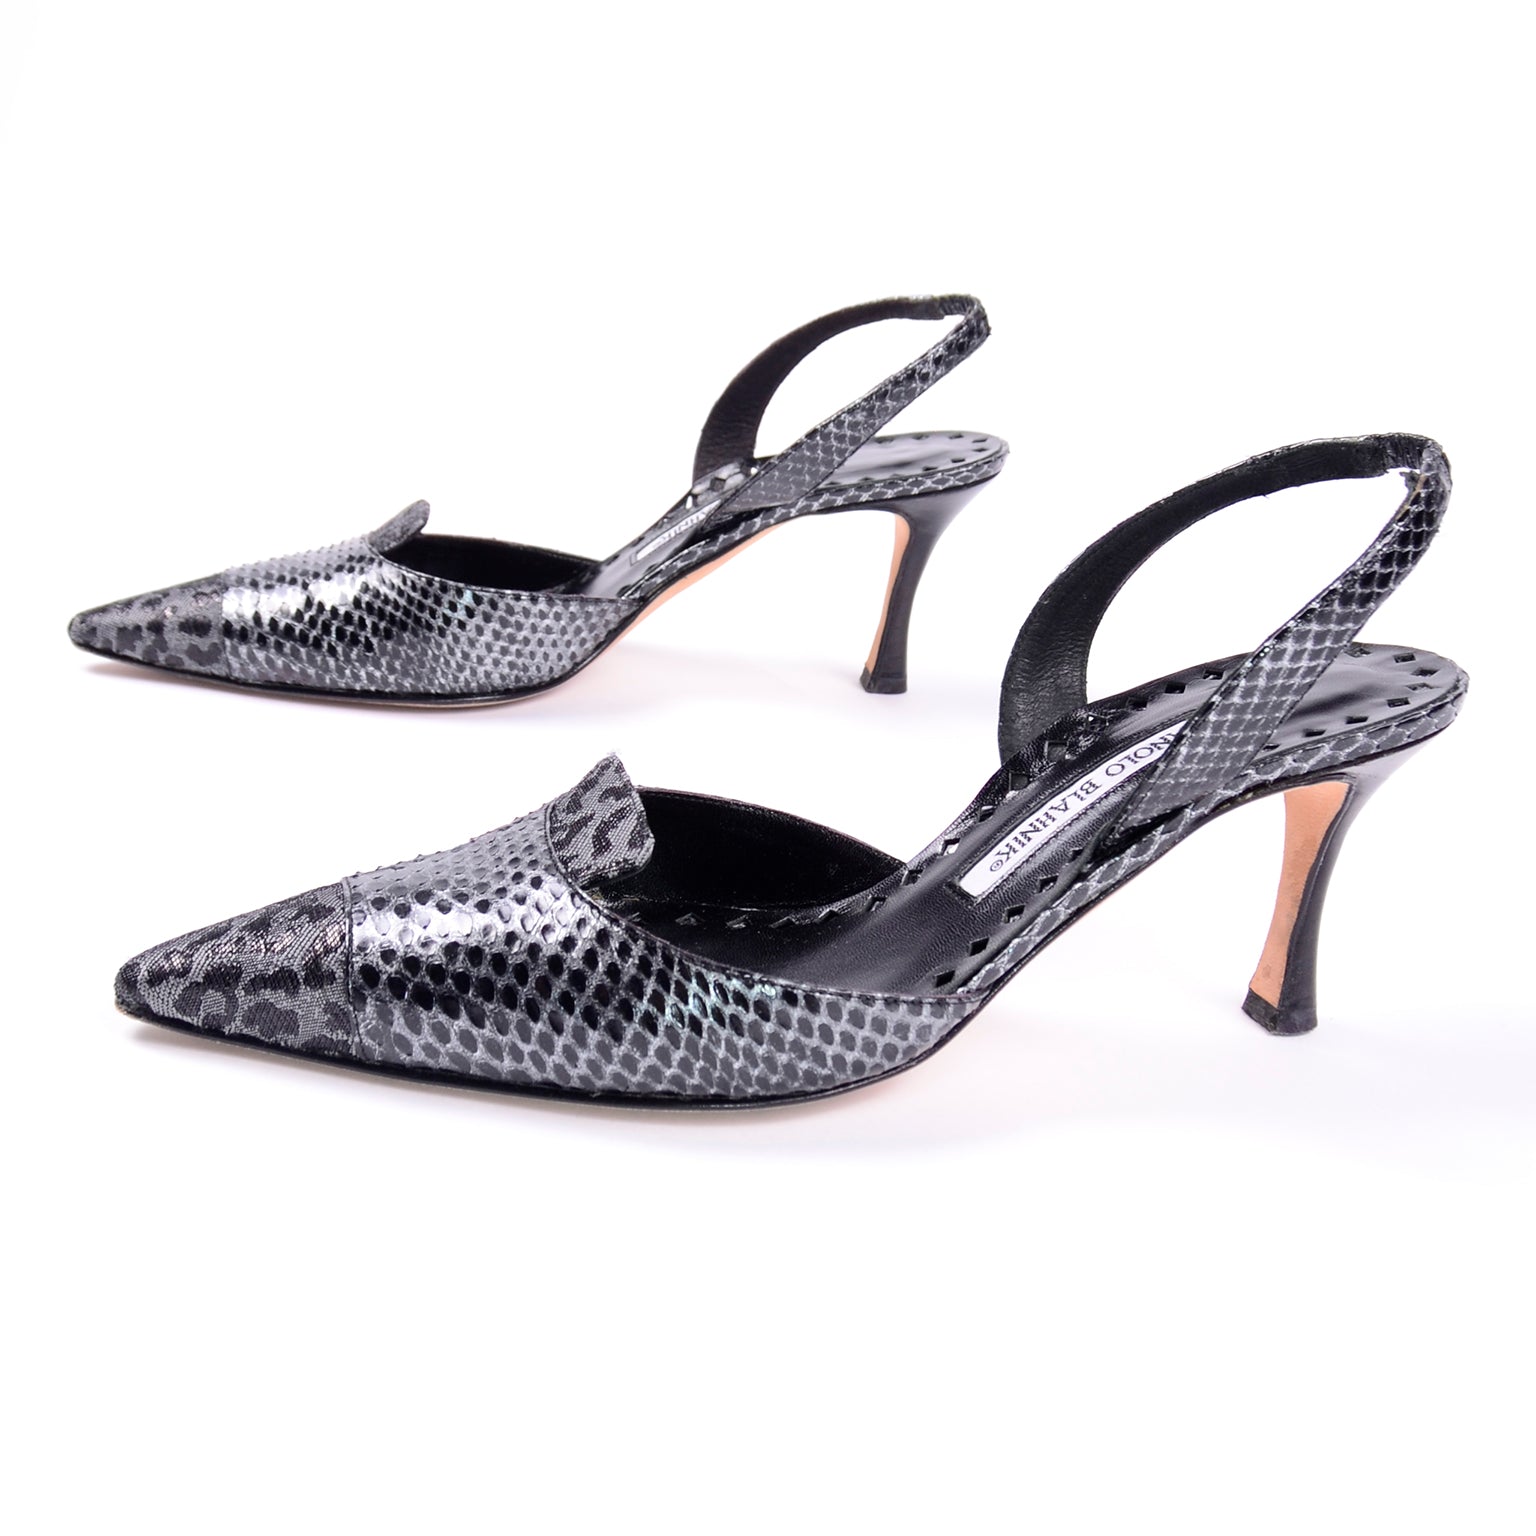 Snakeskin Ankle Strap Platform Holographic Shoes In Silver|FSJshoes